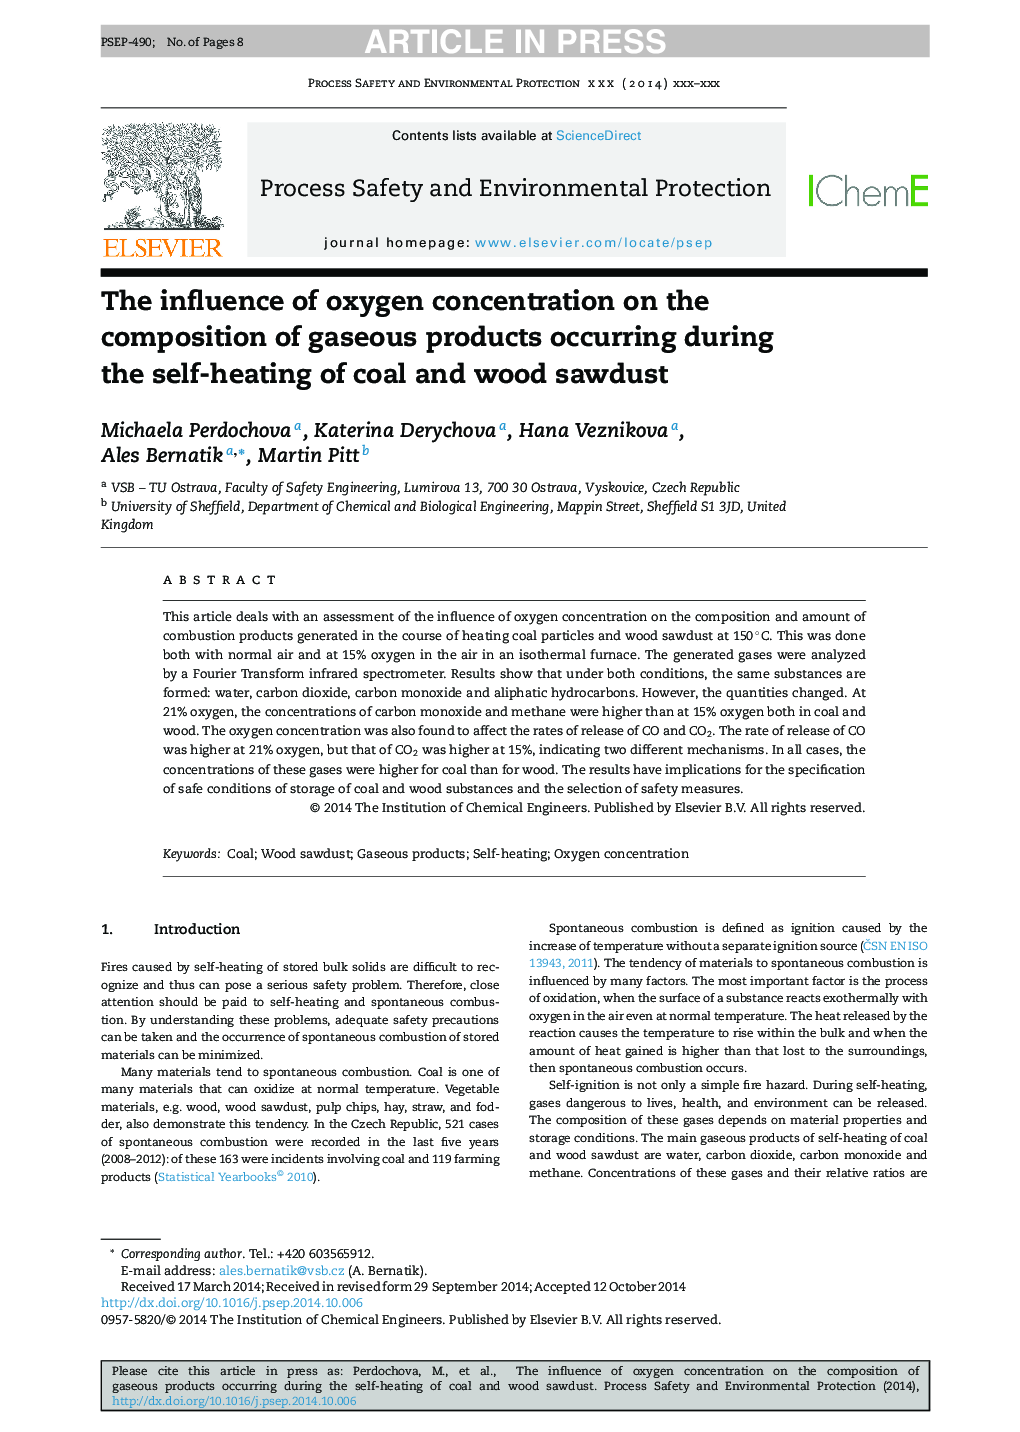 The influence of oxygen concentration on the composition of gaseous products occurring during the self-heating of coal and wood sawdust